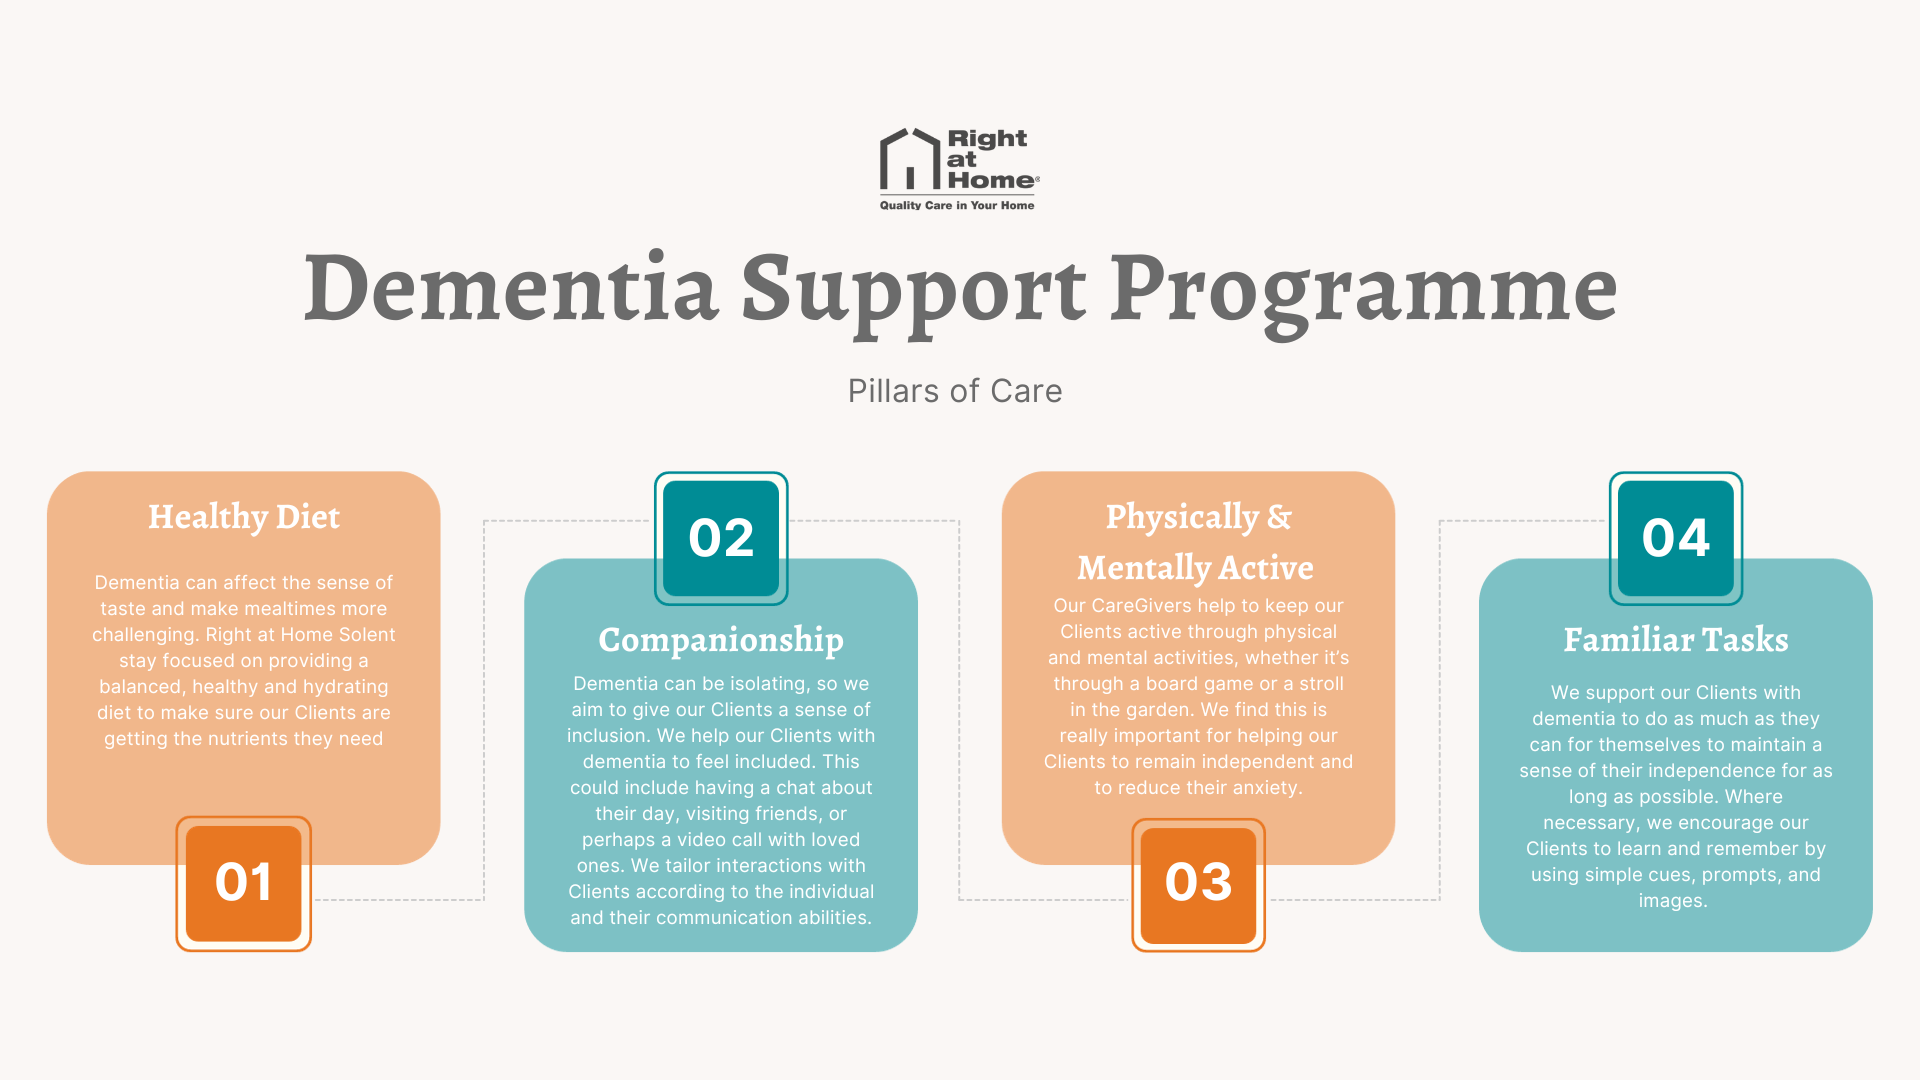 Right at Home Dementia Support Programme Pillars of Care